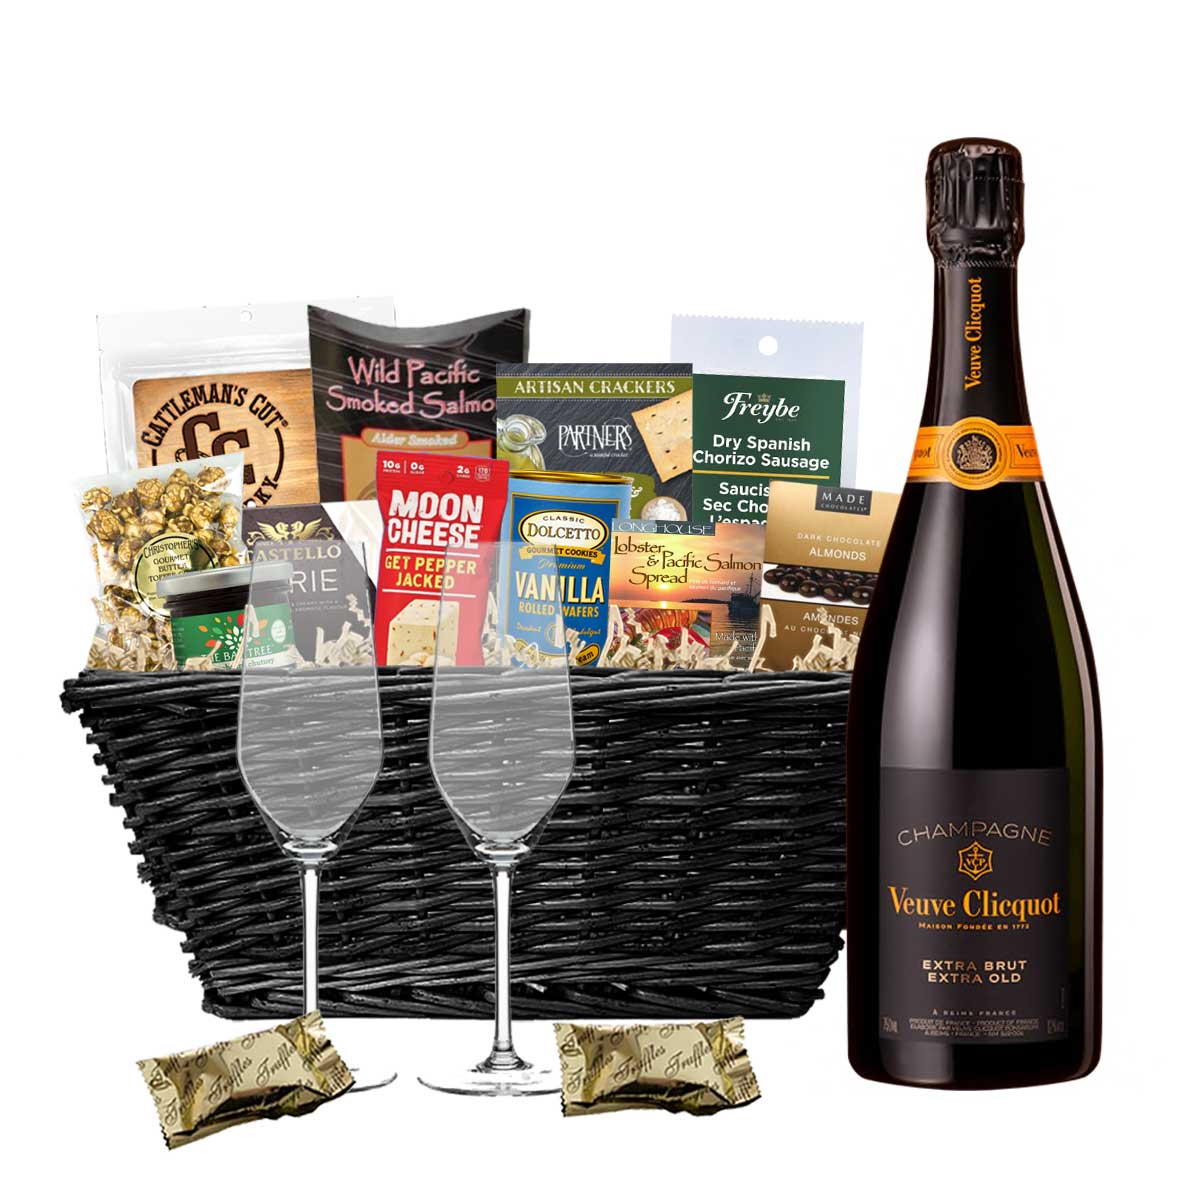 TAG Liquor Stores BC - Veuve Clicquot Extra Brut Extra Old Champagne 750ml Gift Basket